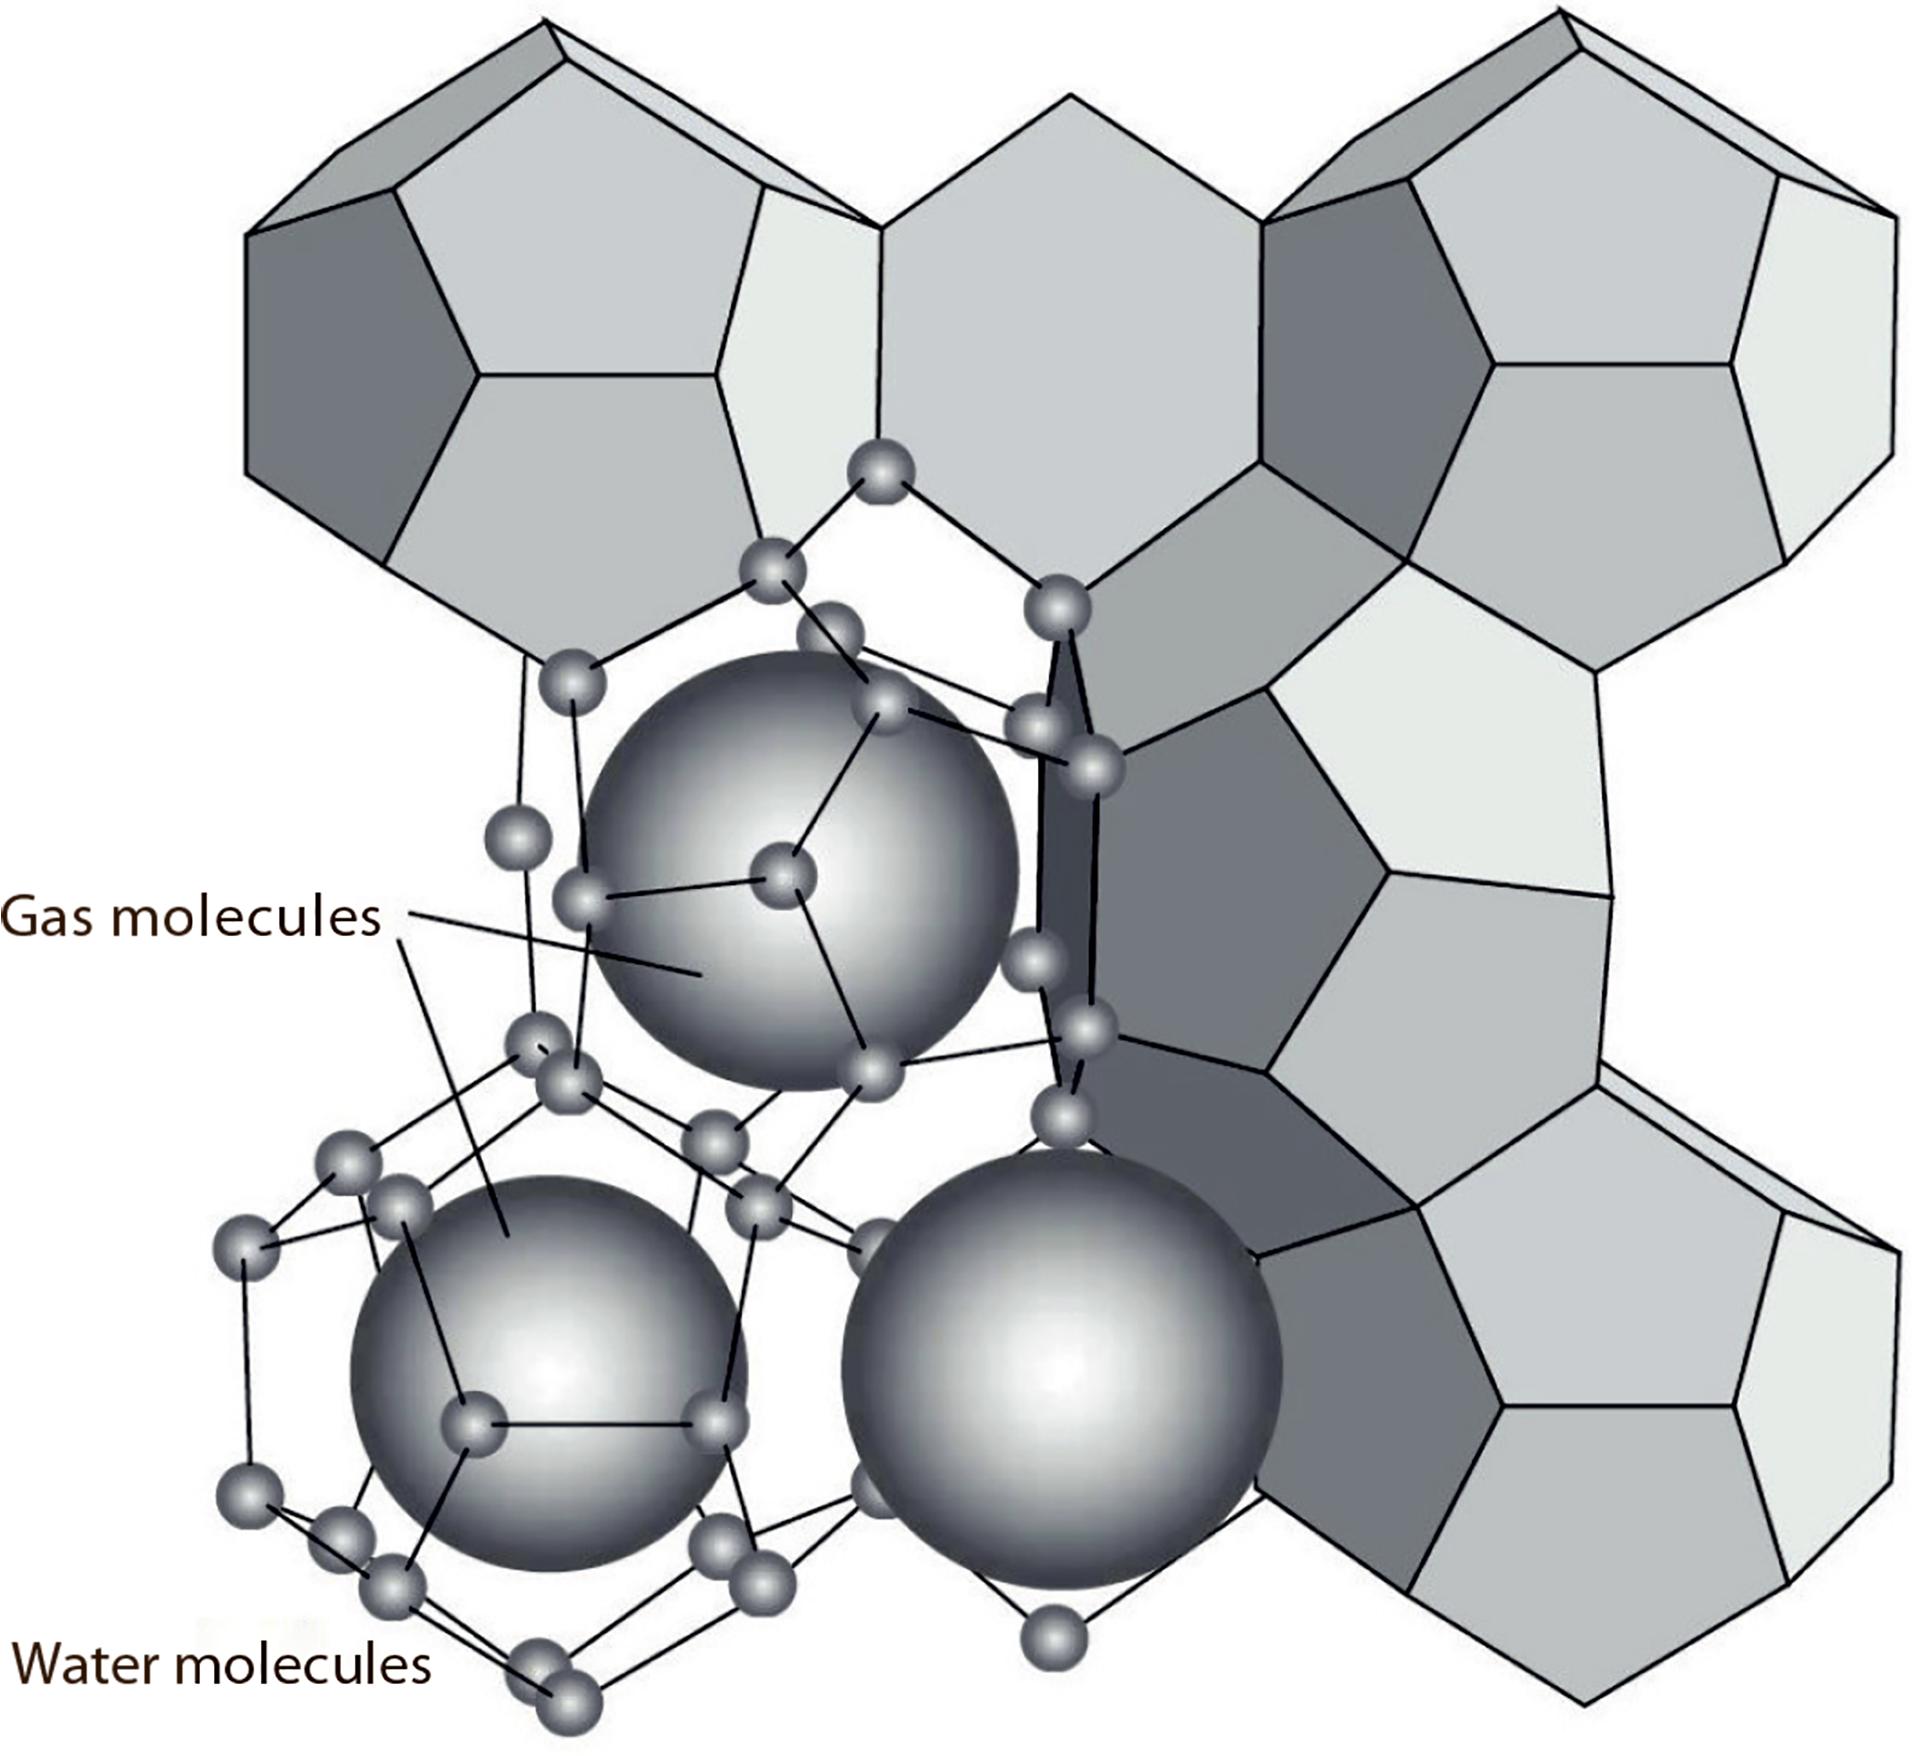 Figure 8.4 A model showing the molecular structure of gas hydrate. The water molecules form a lattice which encloses the gas molecules. From Maslin et al (2010).